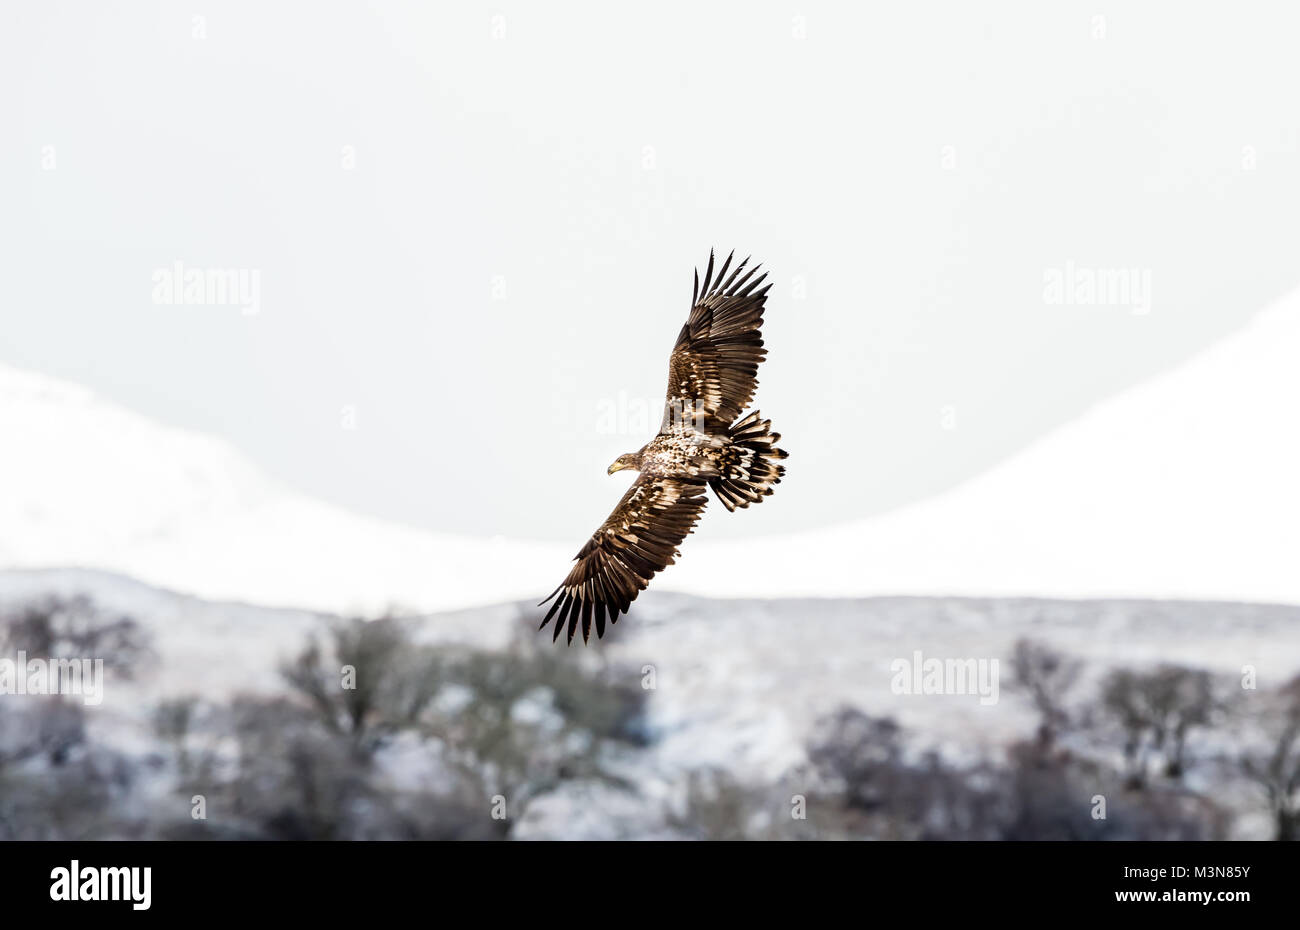 Young white tailed eagle flying in snowy landscape on the Isle of Mull, Scotland, UK Stock Photo